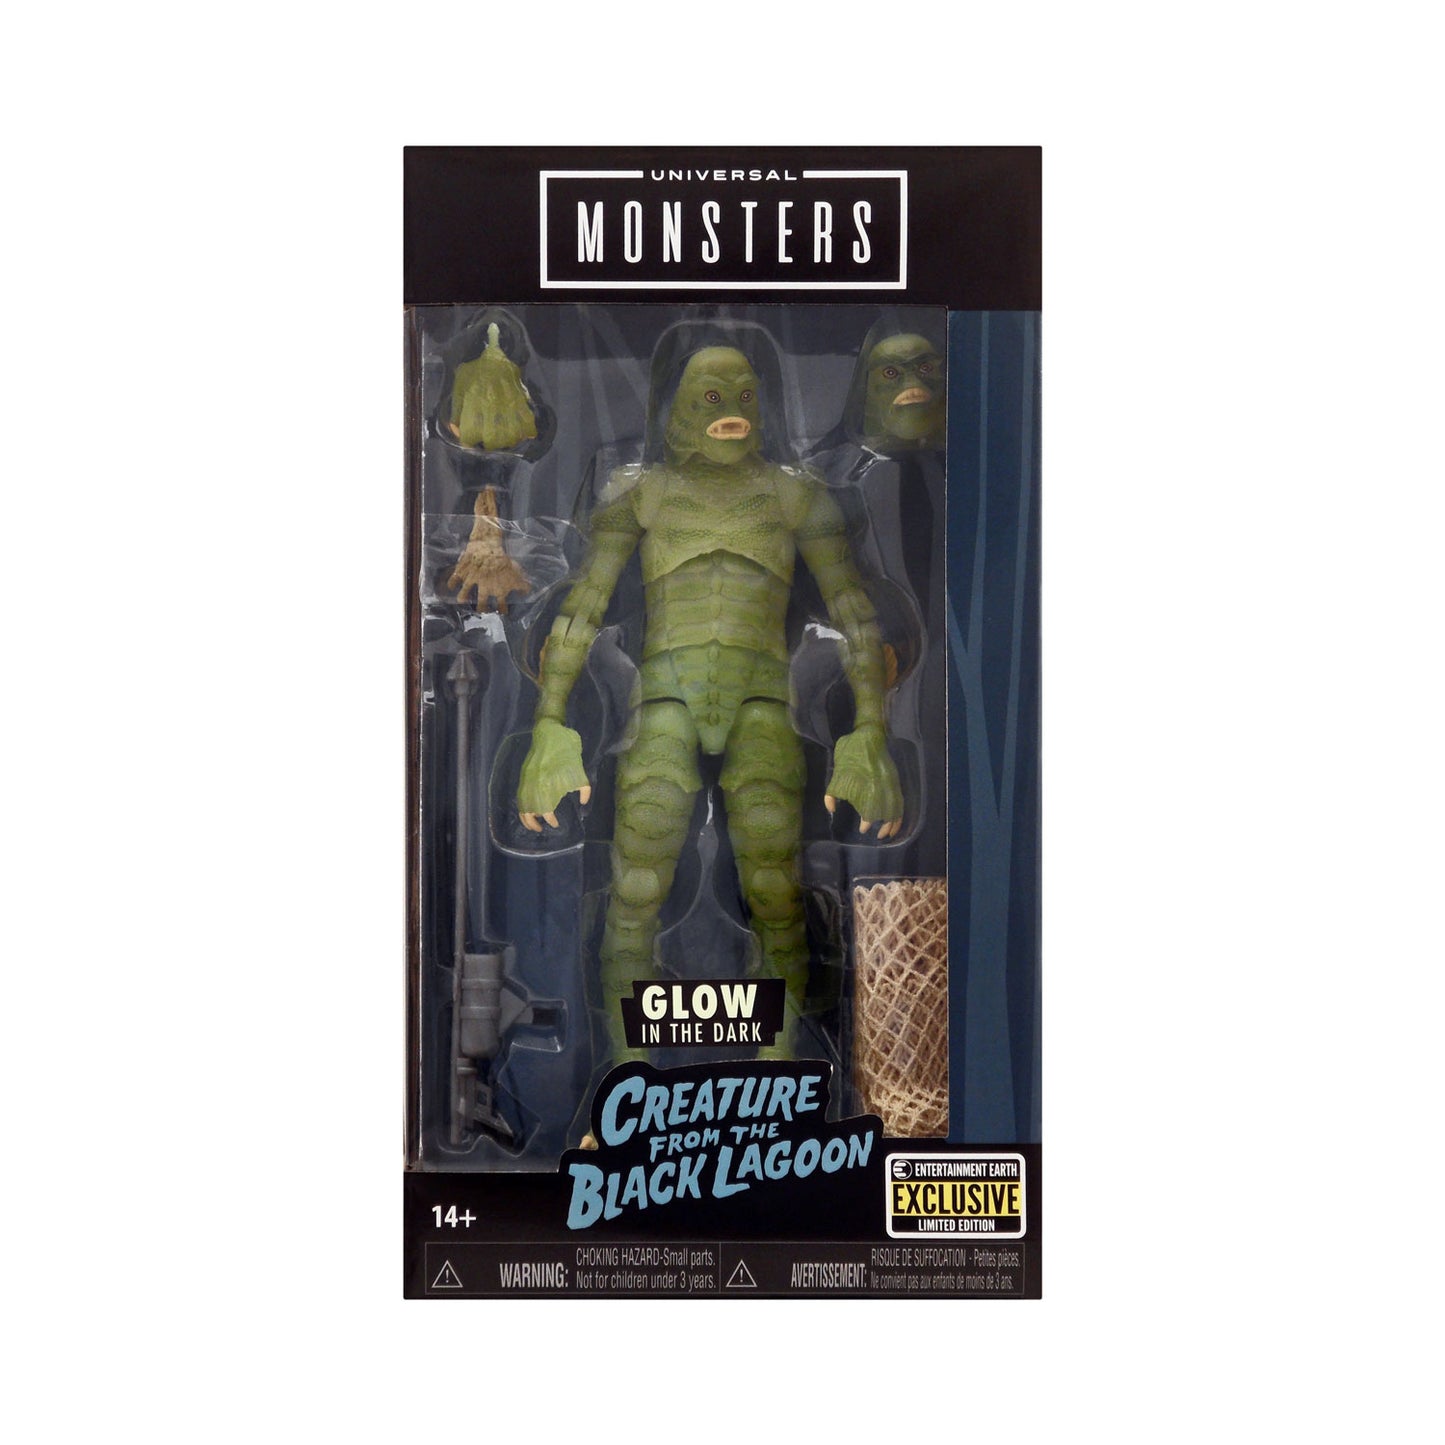 Glow in the Dark Creature from the Black Lagoon 6-Inch Action Figure from Jada Toys Universal Monsters